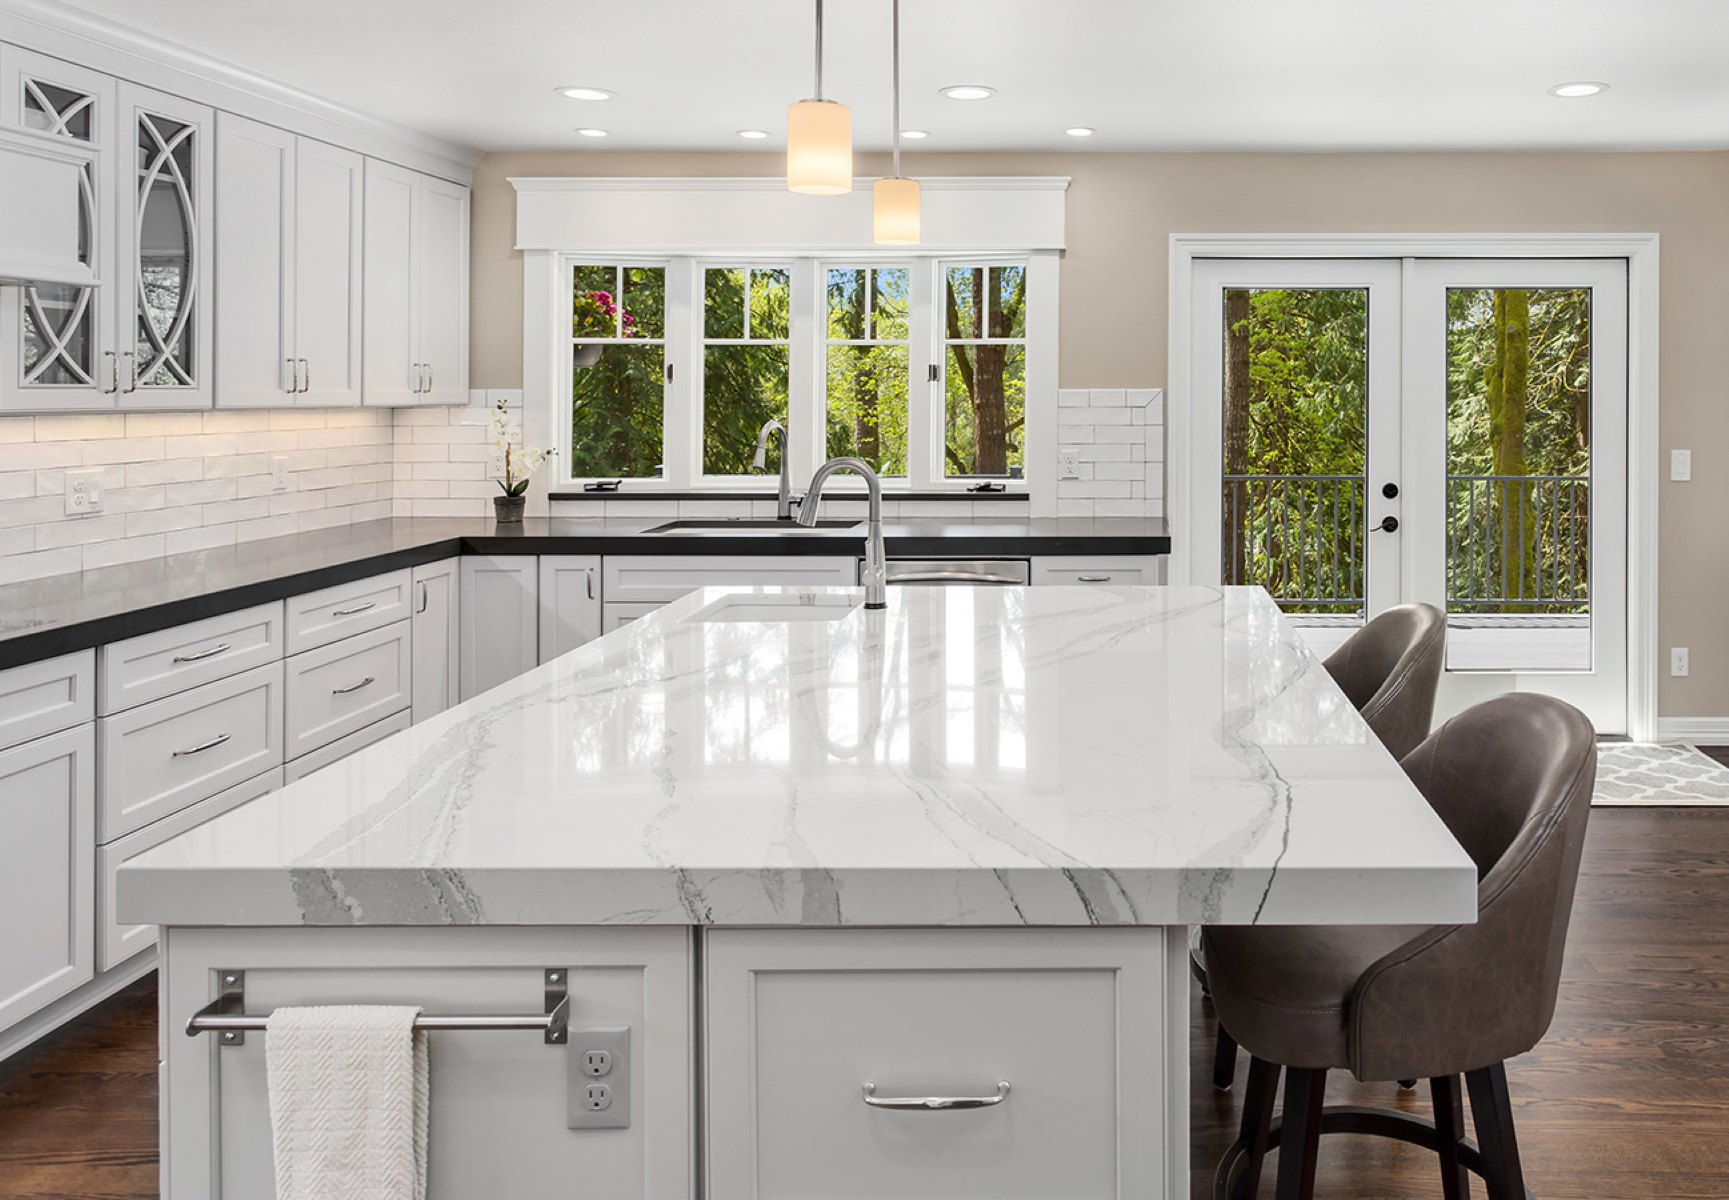 What Are Prefab Countertops